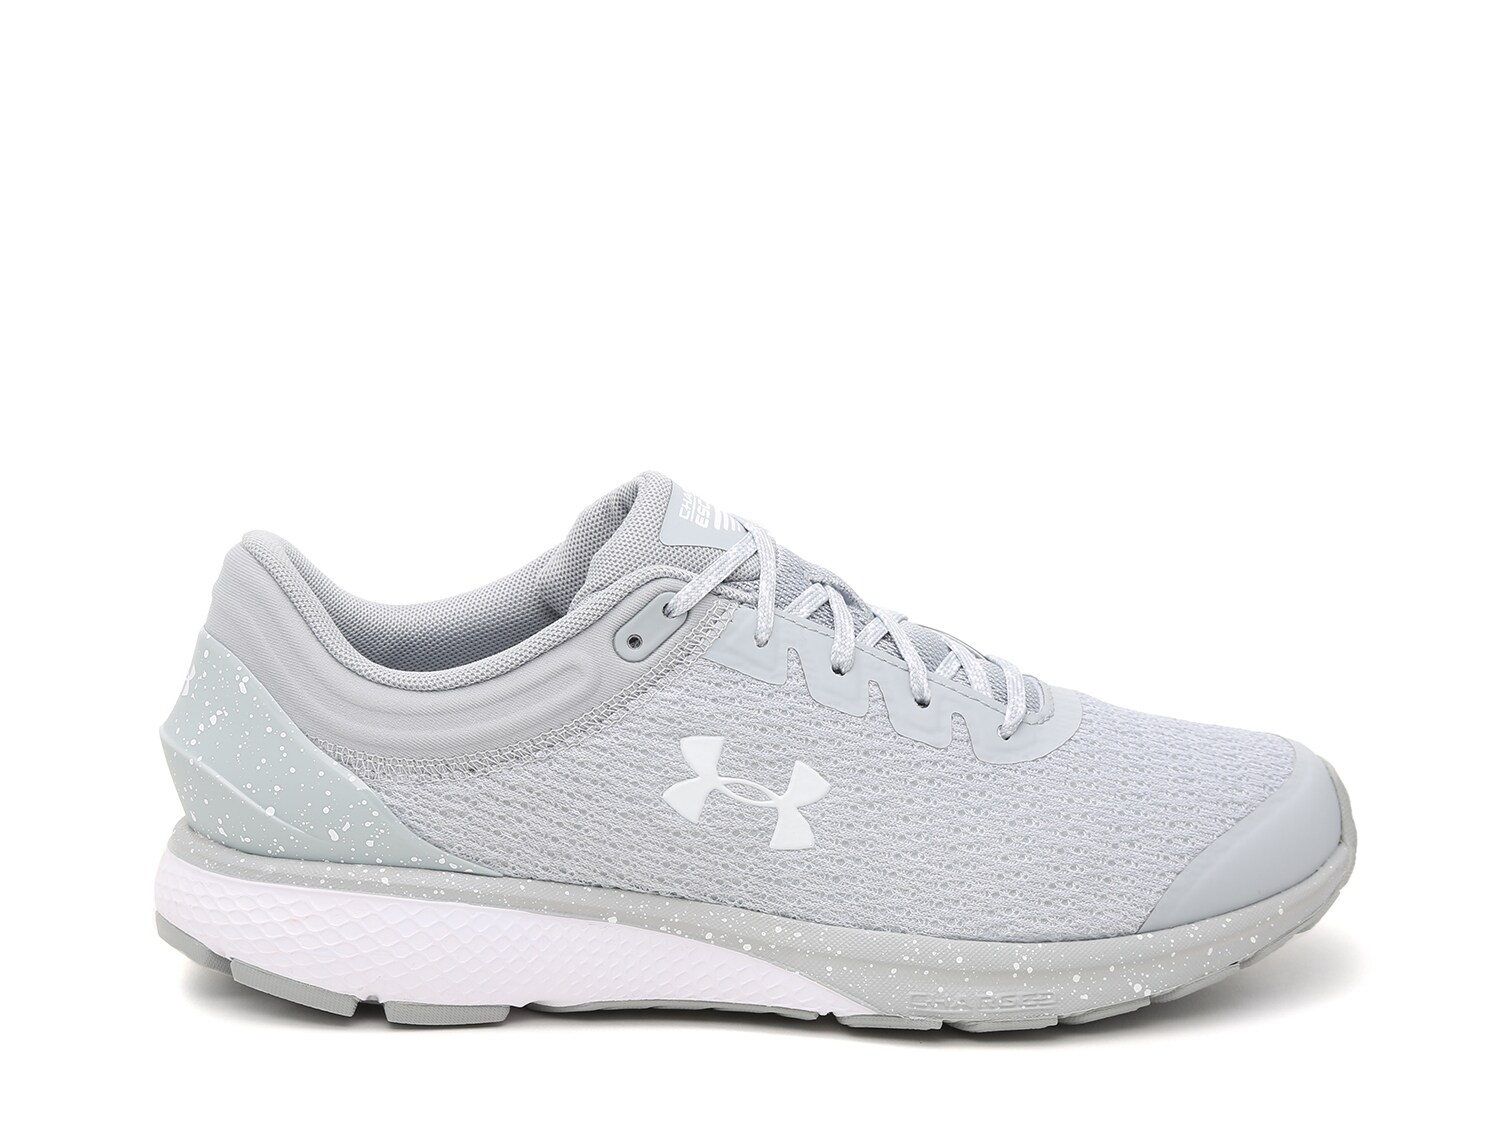 Under Armour Charged Escape 3 Running Shoe - Women's | DSW